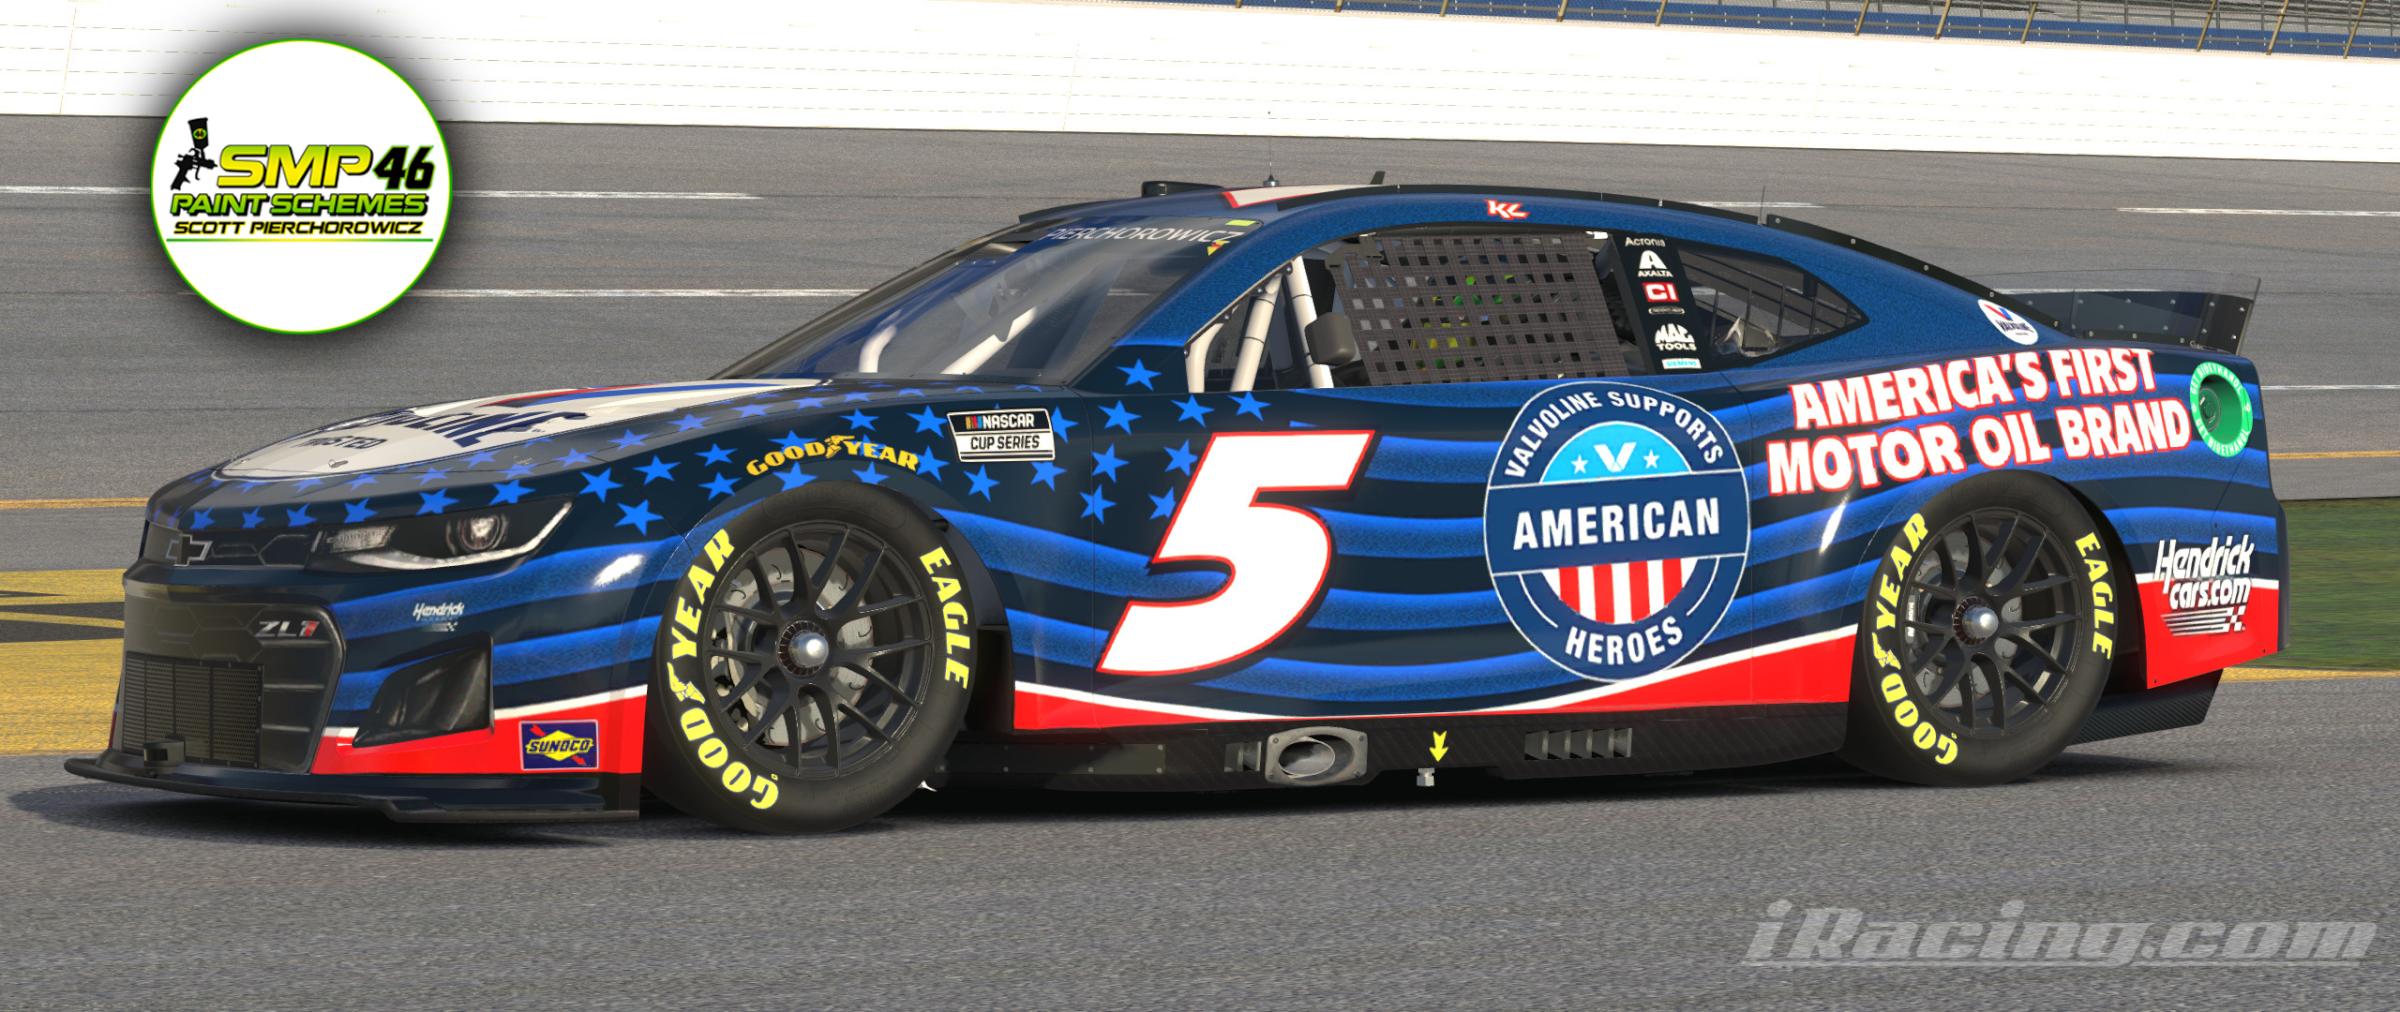 Preview of Kyle Larson Valvoline Supports American Heroes NO # by Scott Pierchorowicz